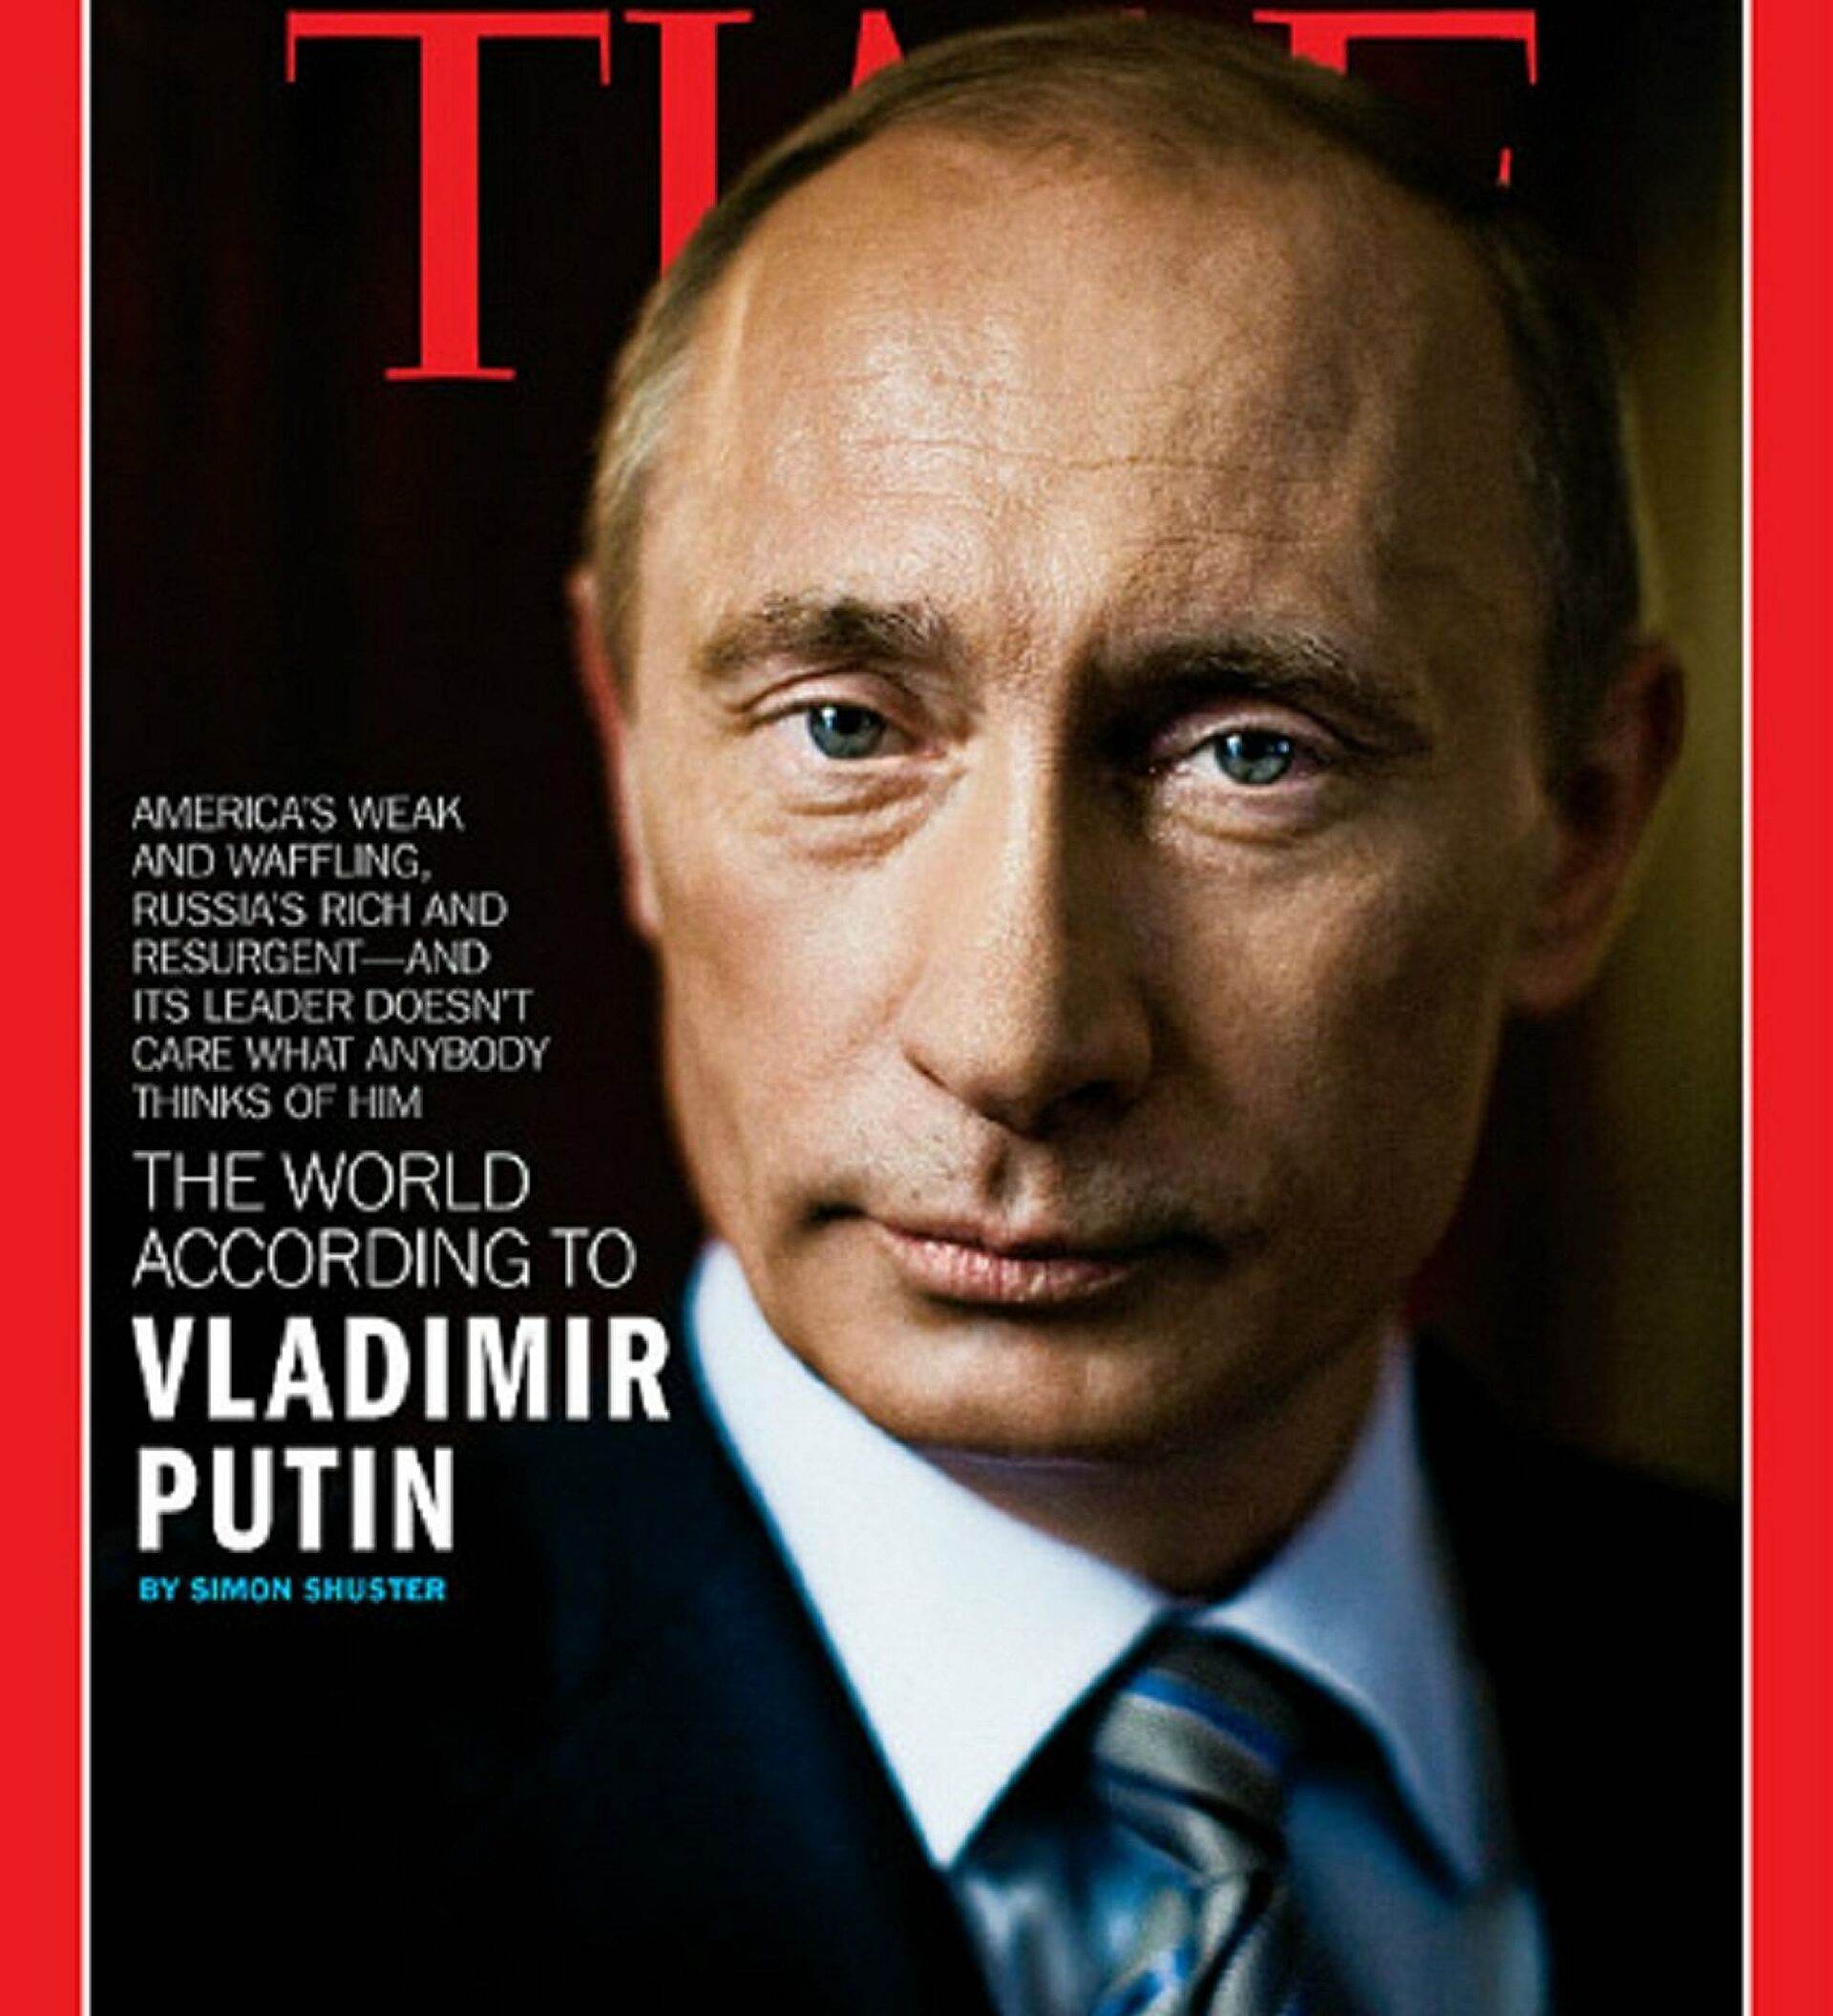 Vladimir Putin on the cover of the The Times magazine